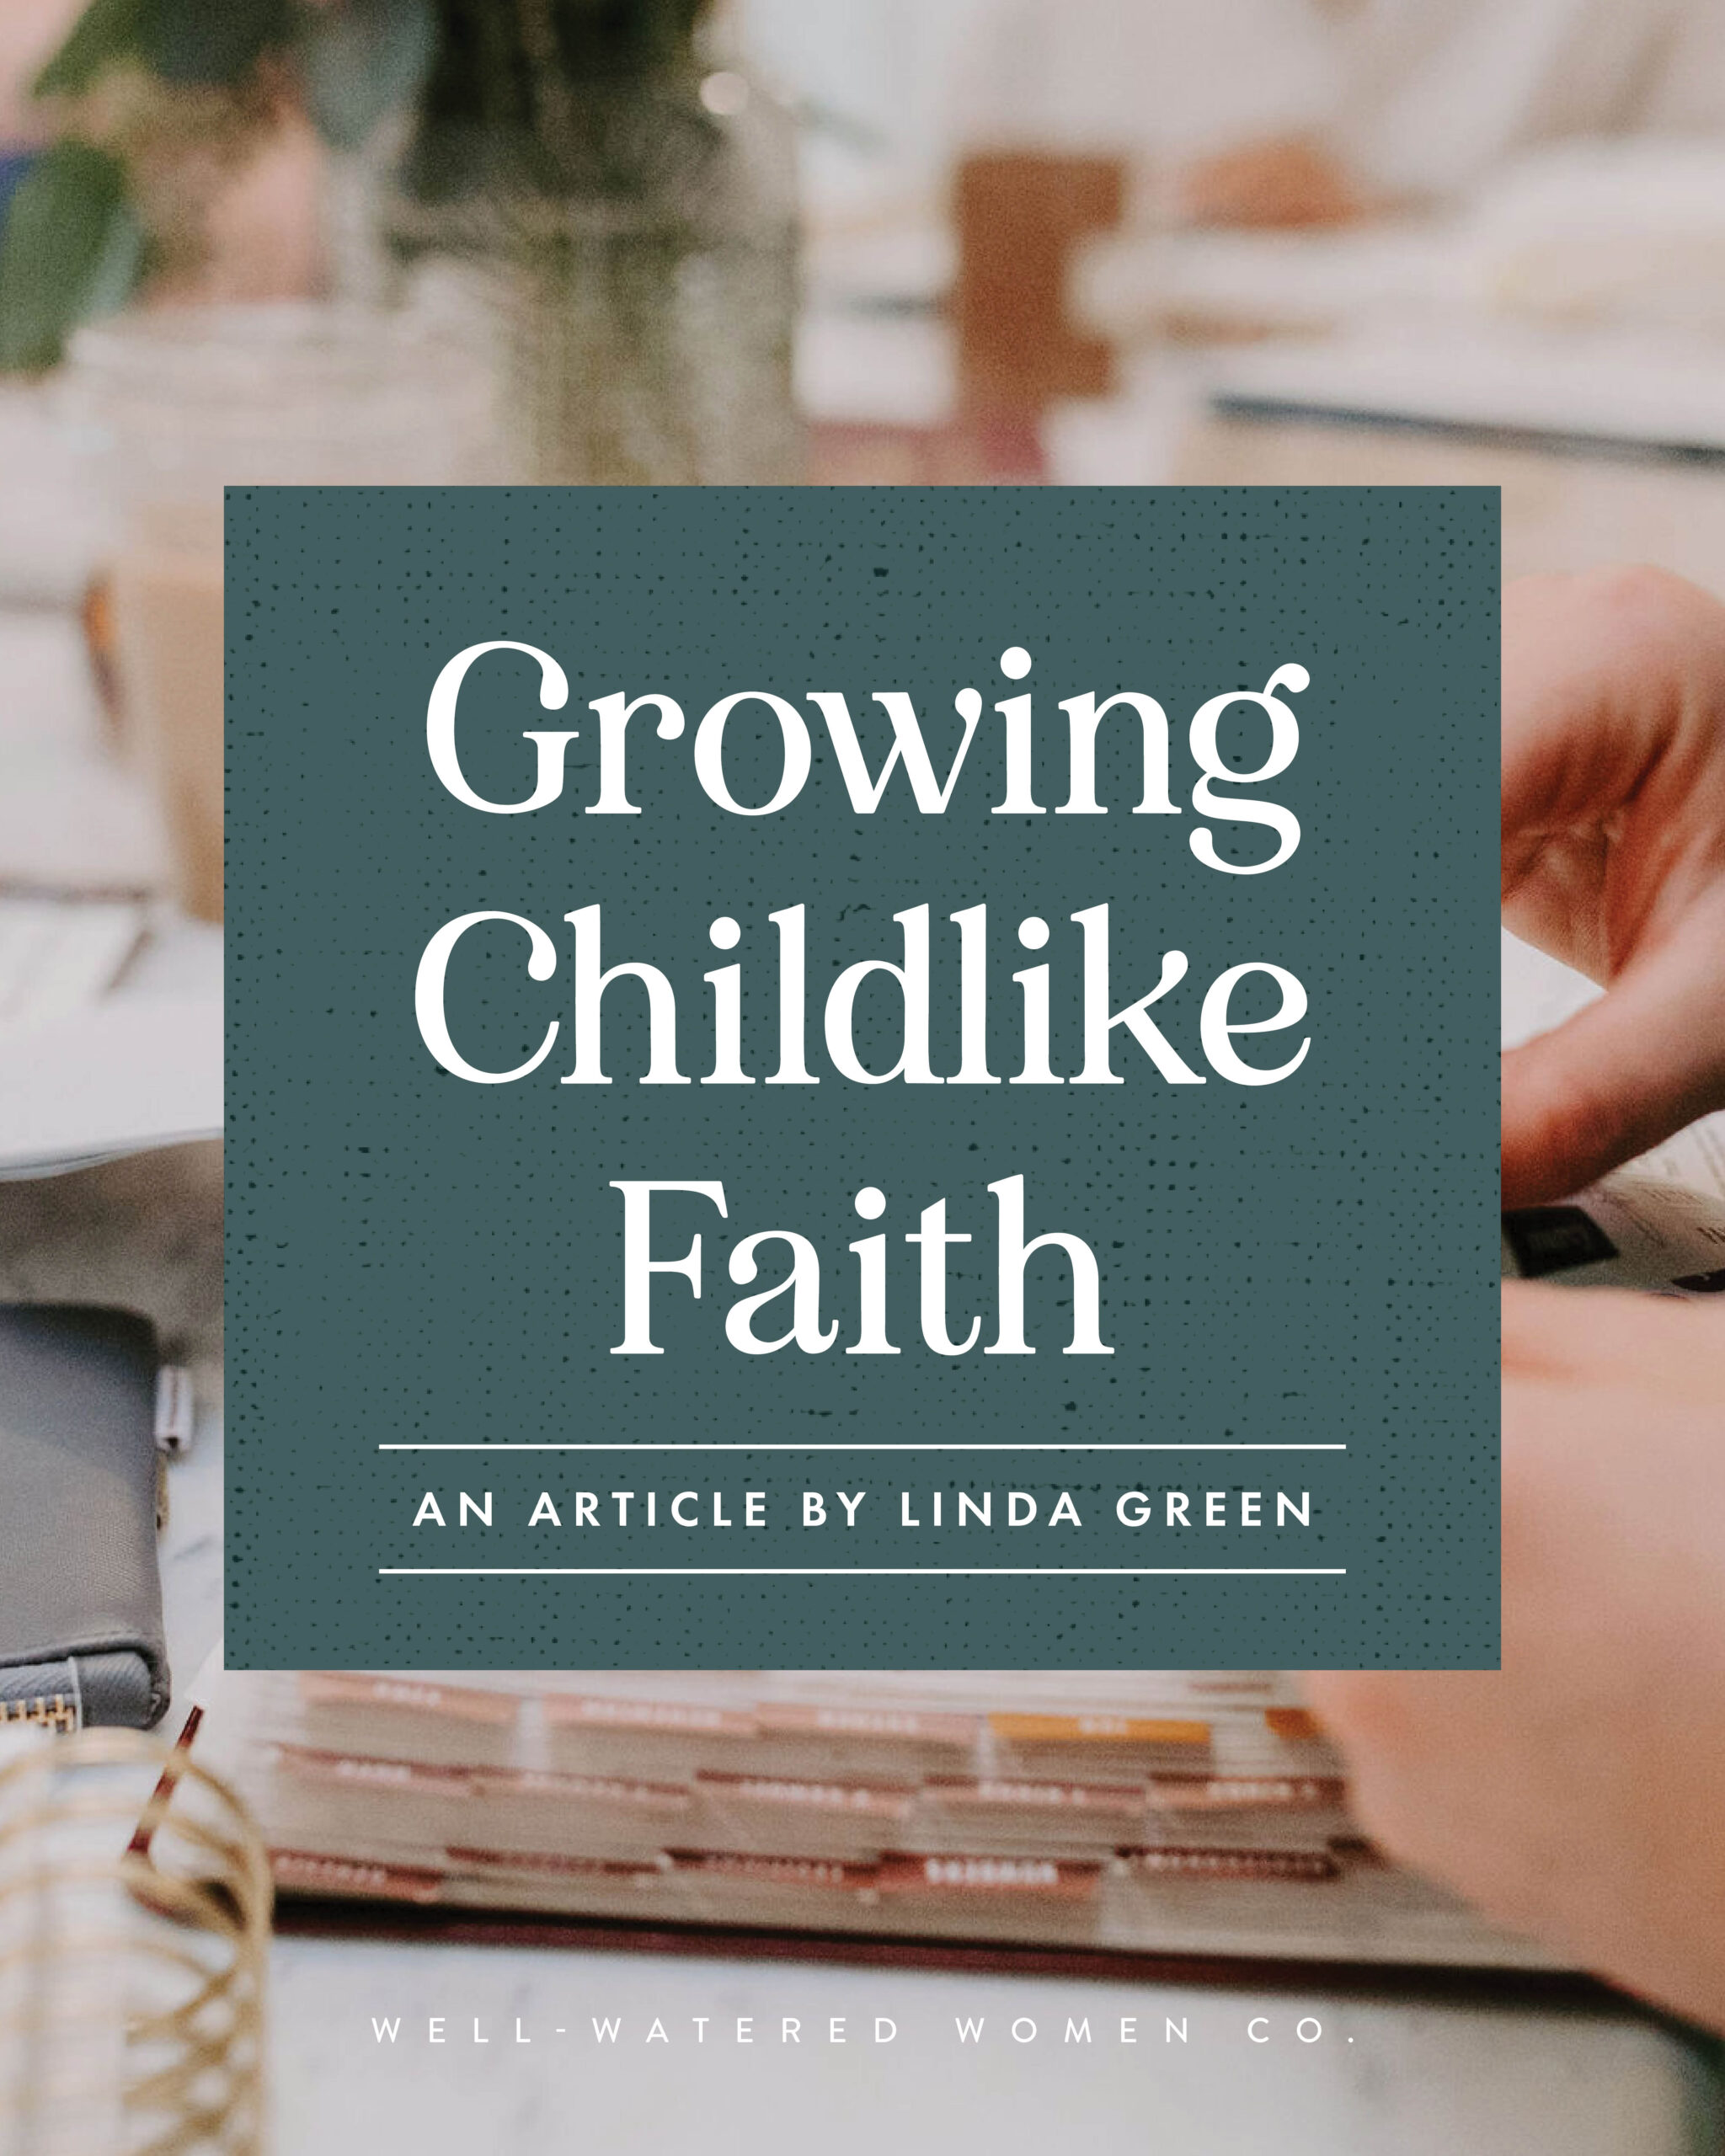 Growing Childlike Faith - an article from Well-Watered Women